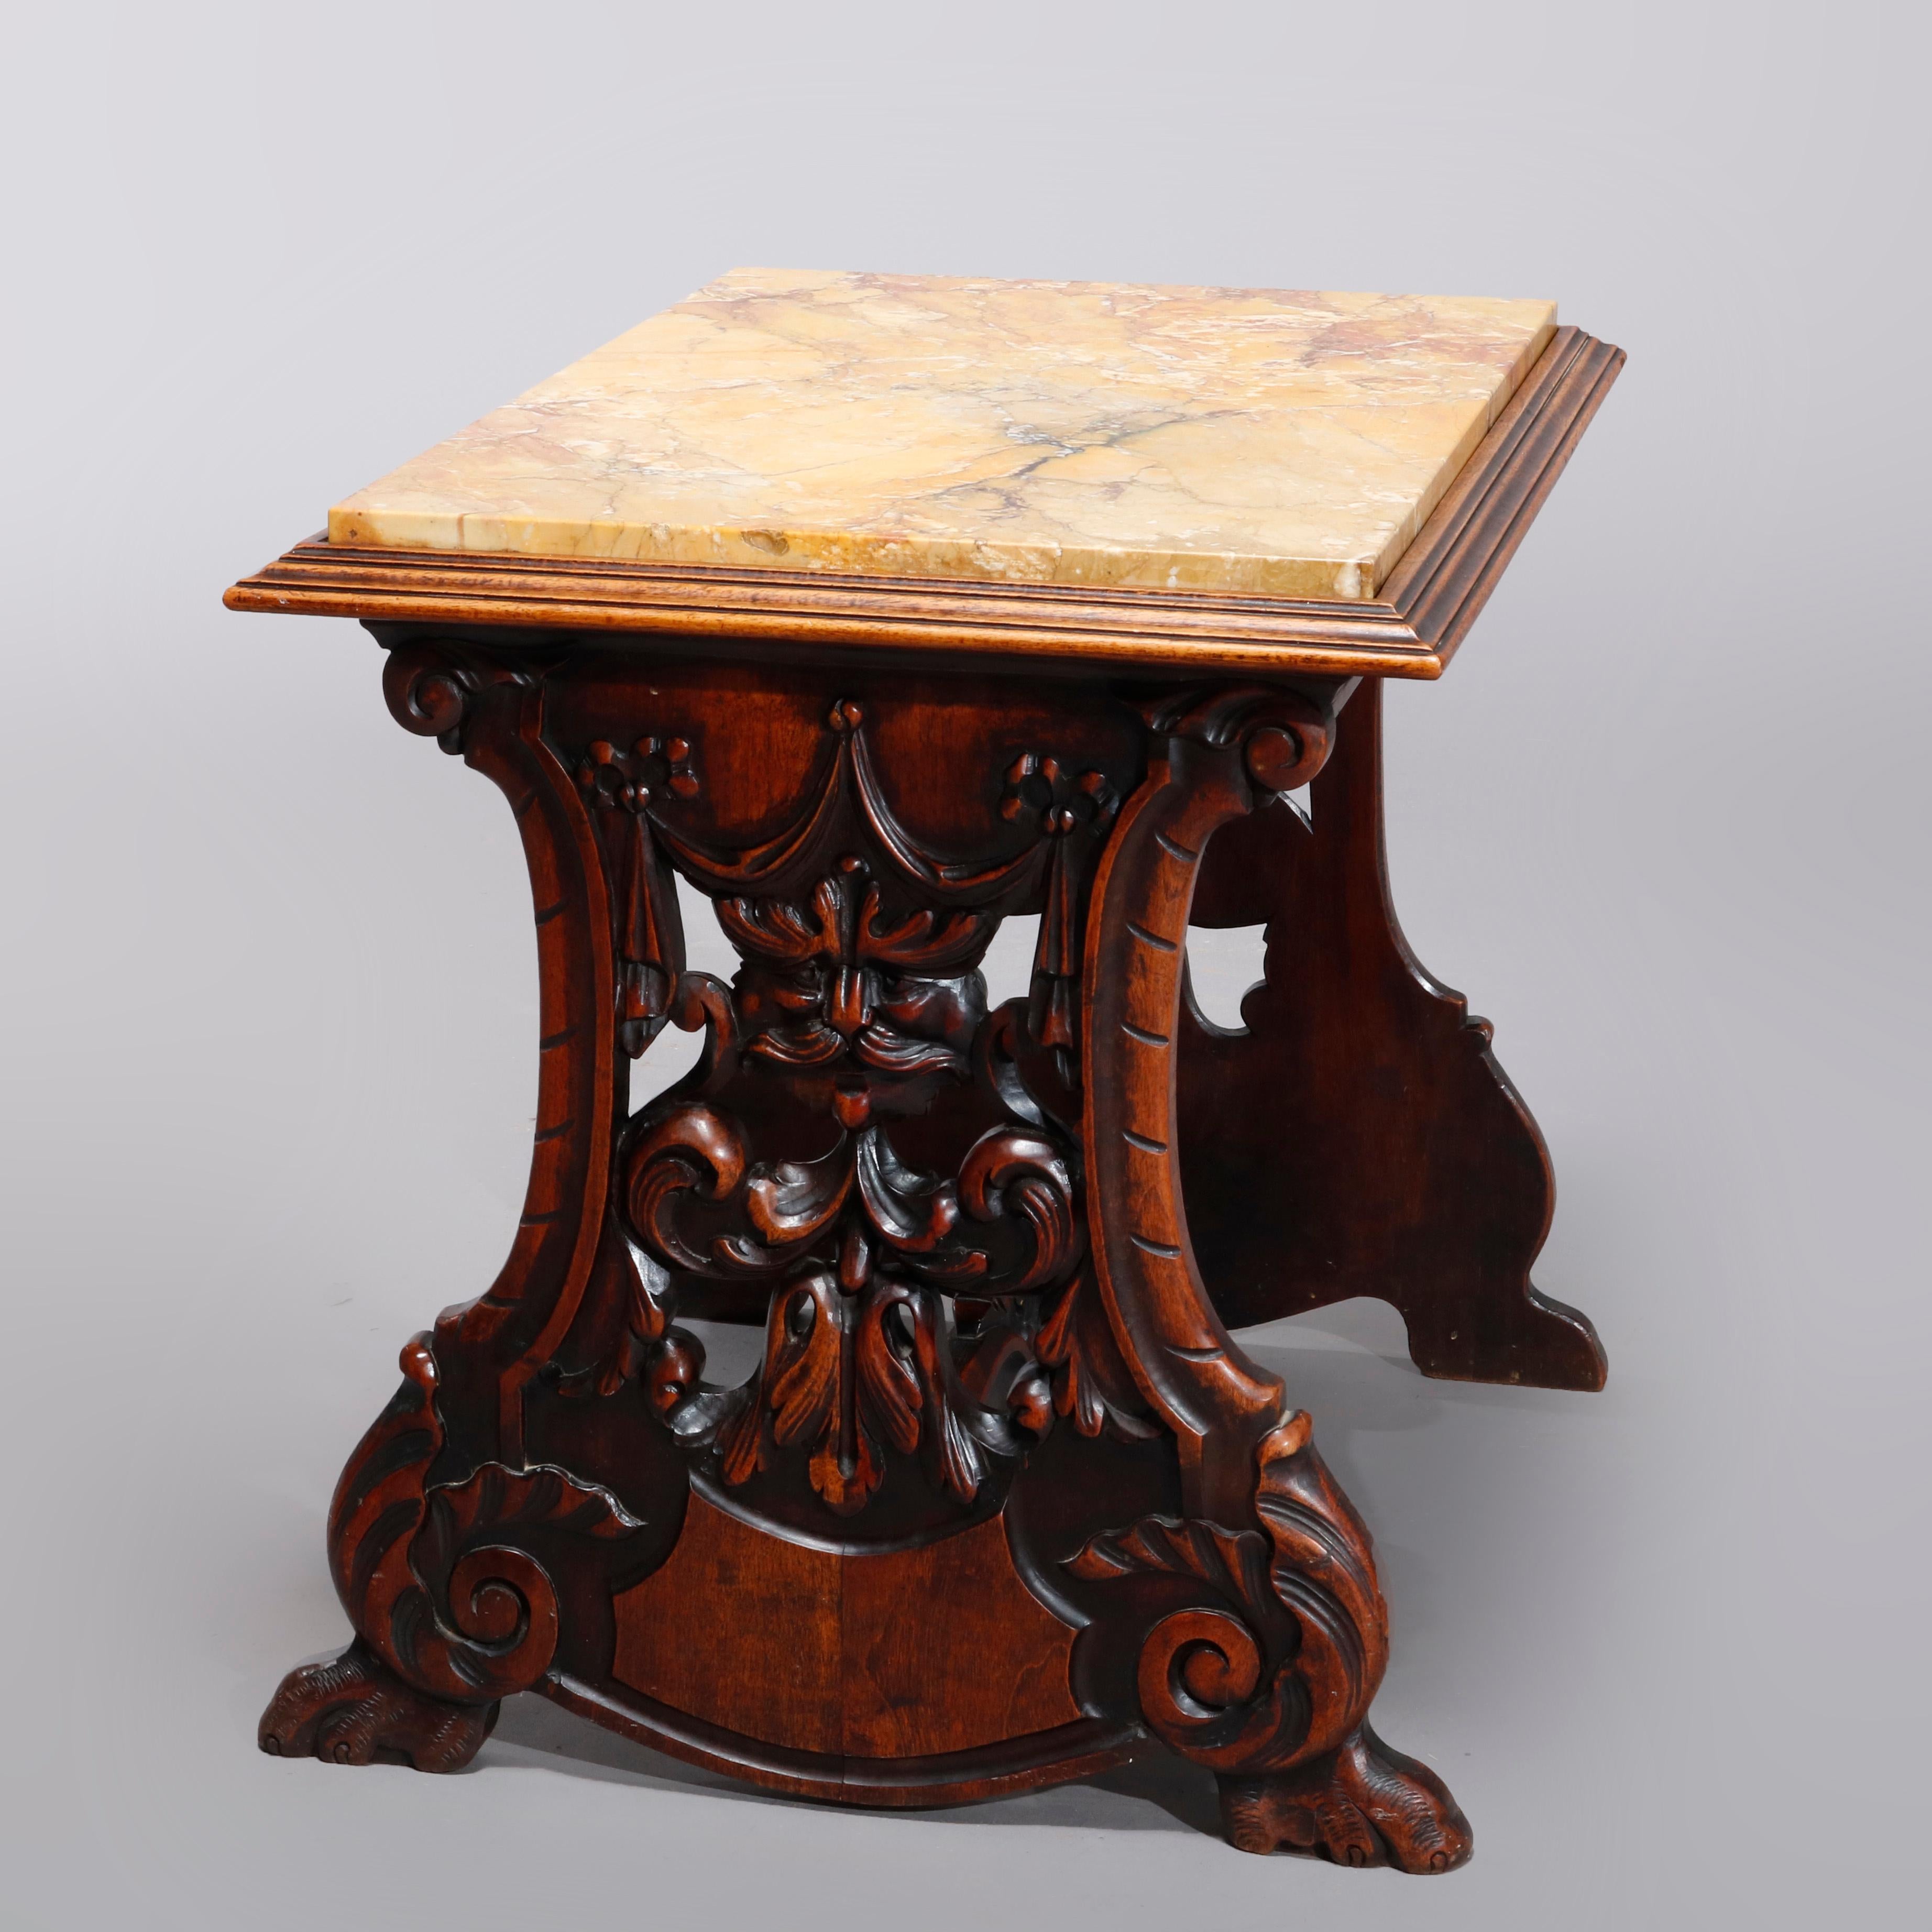 An antique Italian Renaissance Revival side table offers marble top surmounting trestle form walnut base having carved and pierced wind god masks and scroll form stretcher with carved foliate finial, circa 1900.

Measures: 20.25